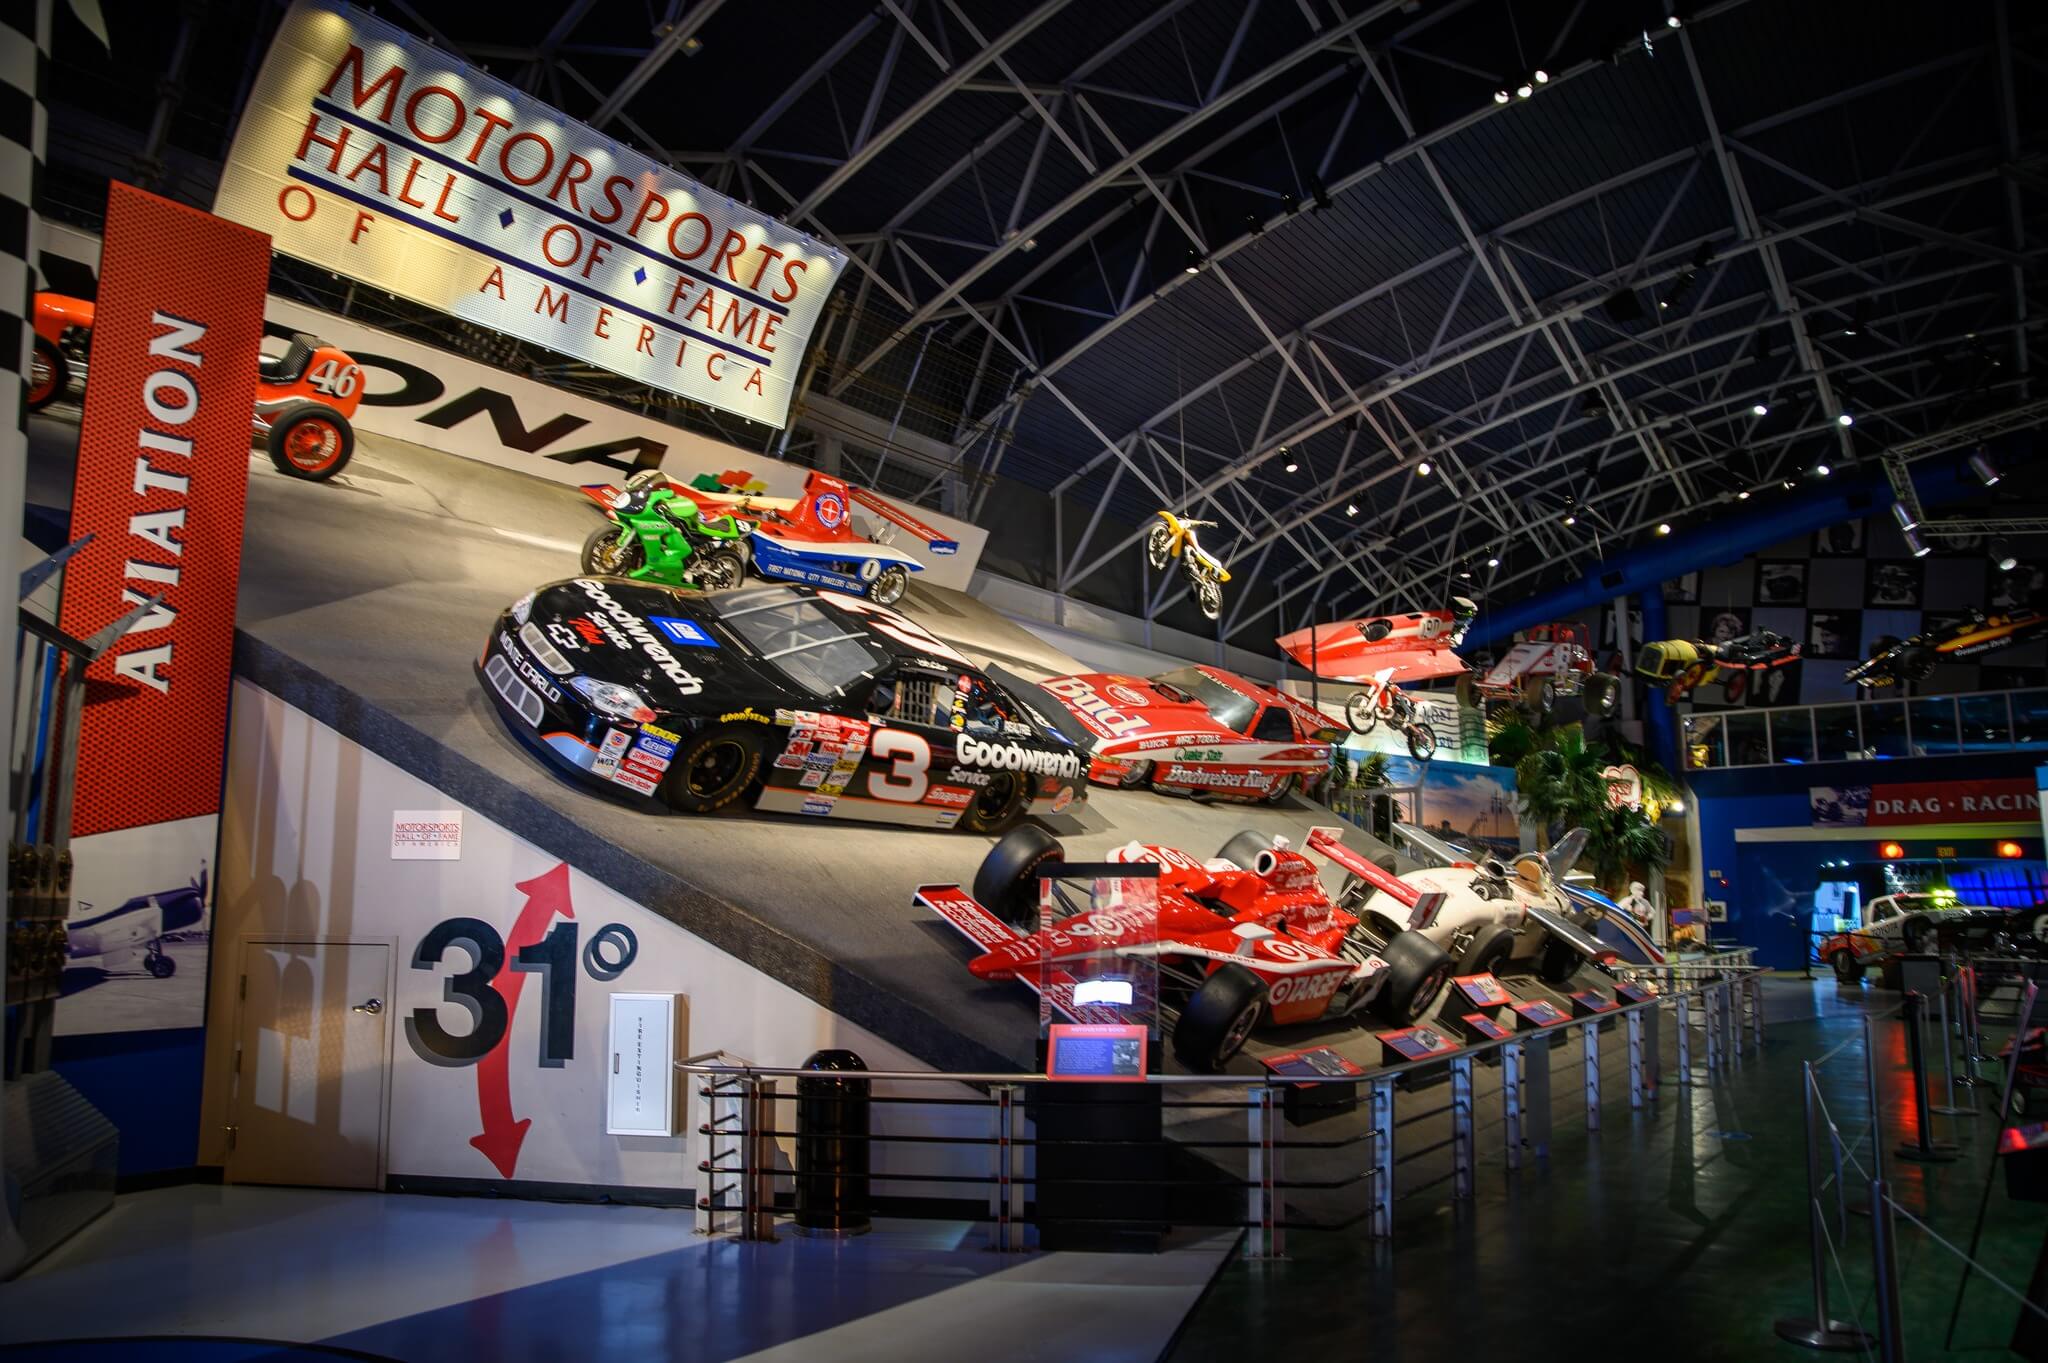 Motorsports Hall of Fame of America 